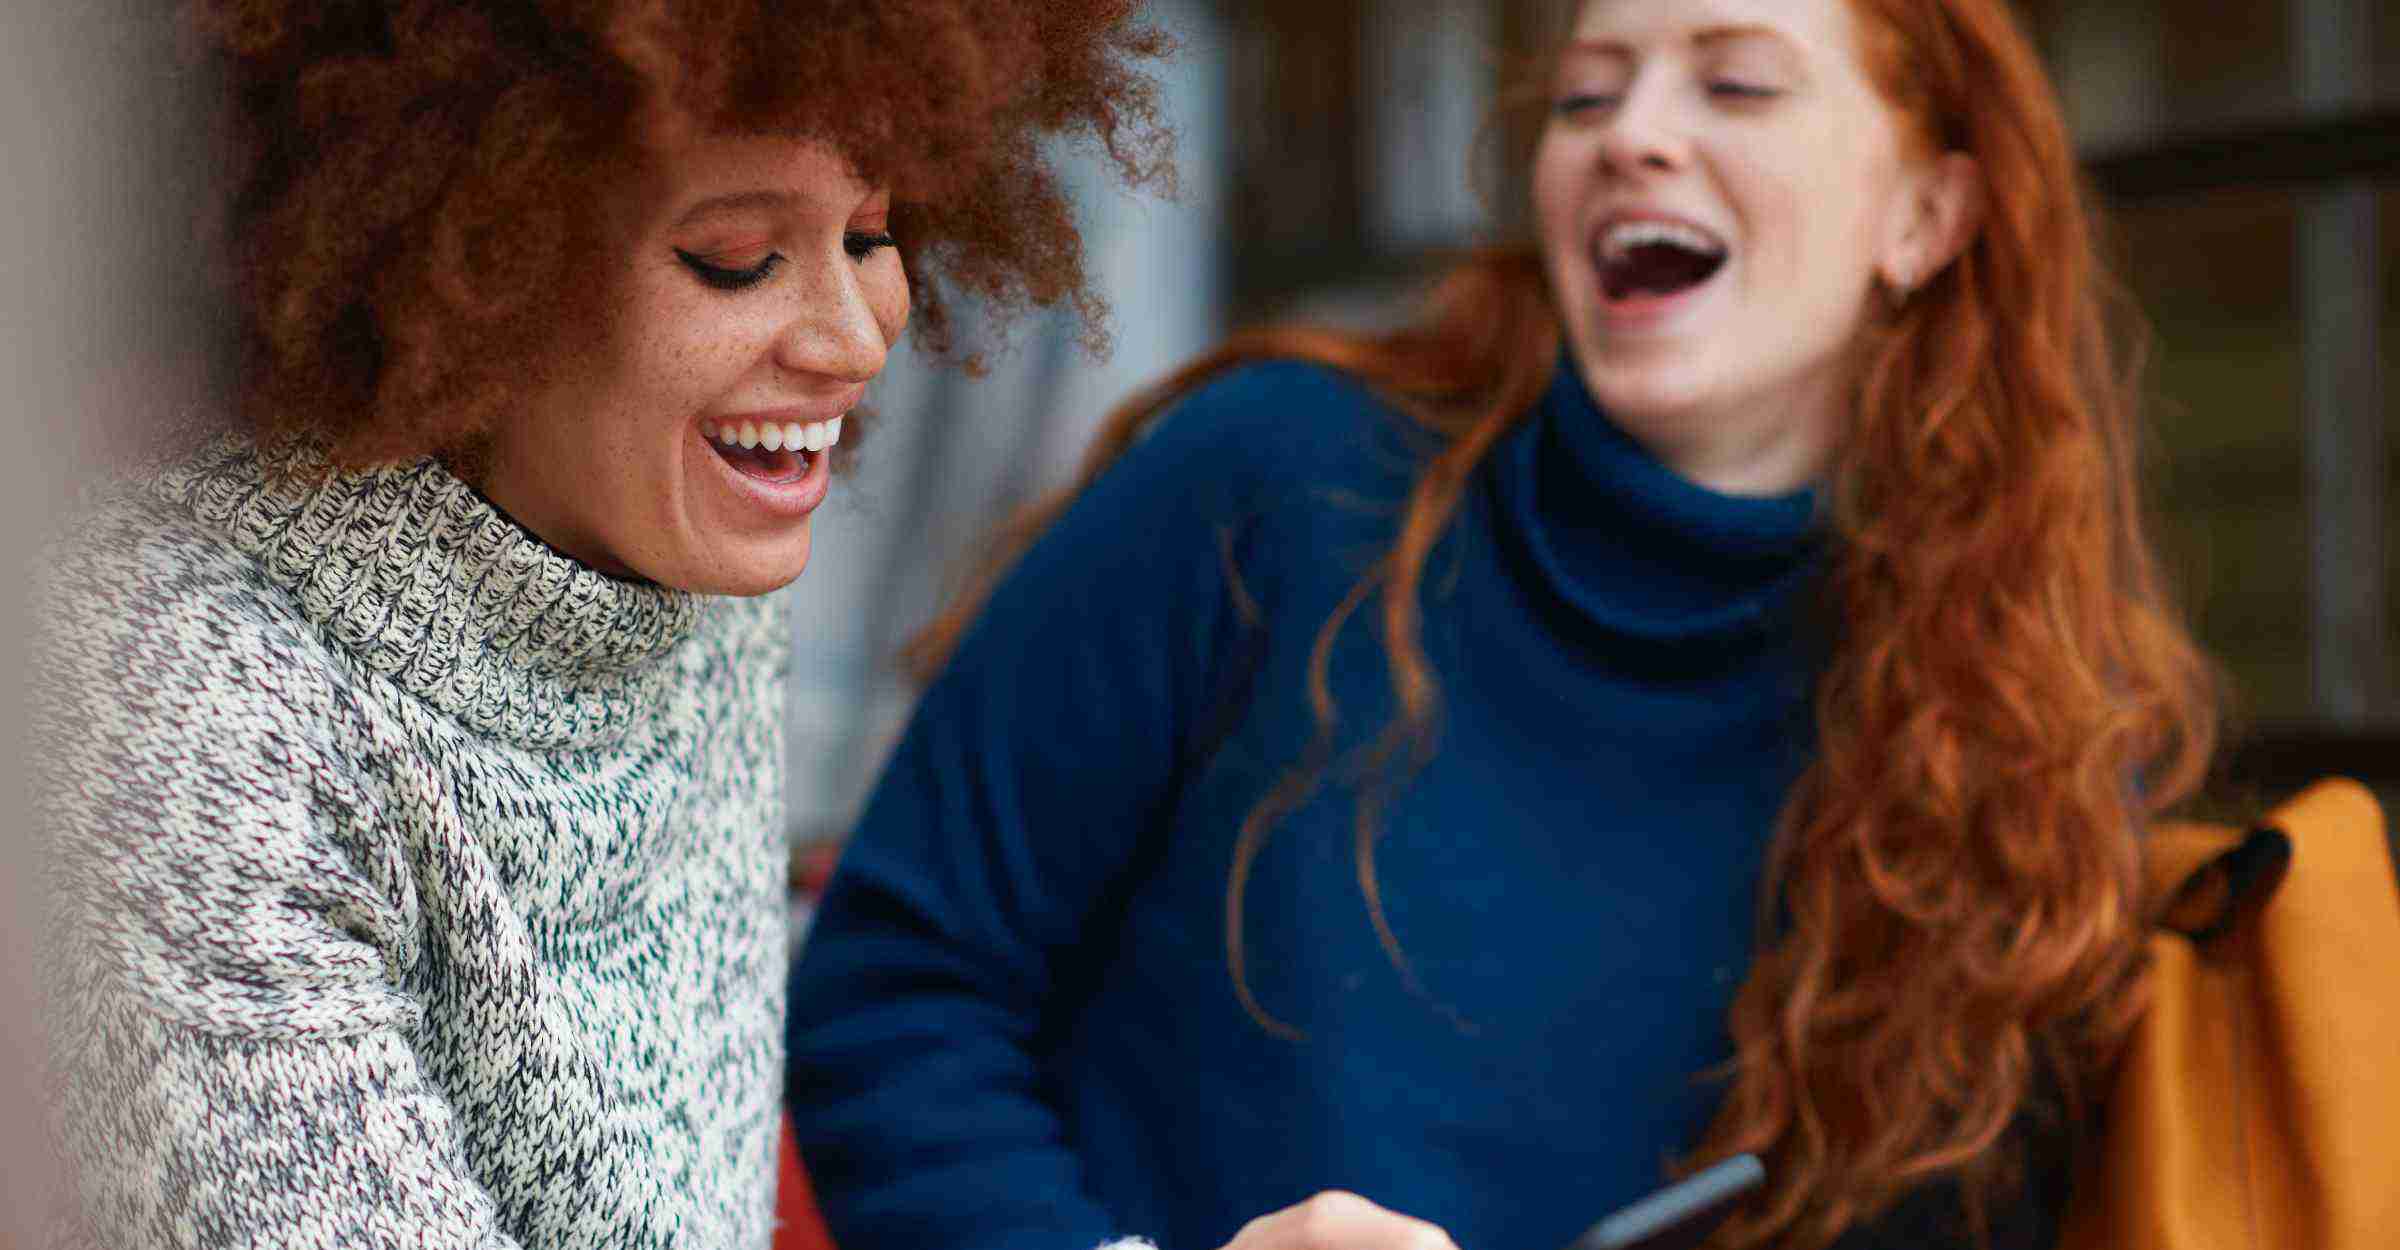 Two women laughing while one of them looks at her phone